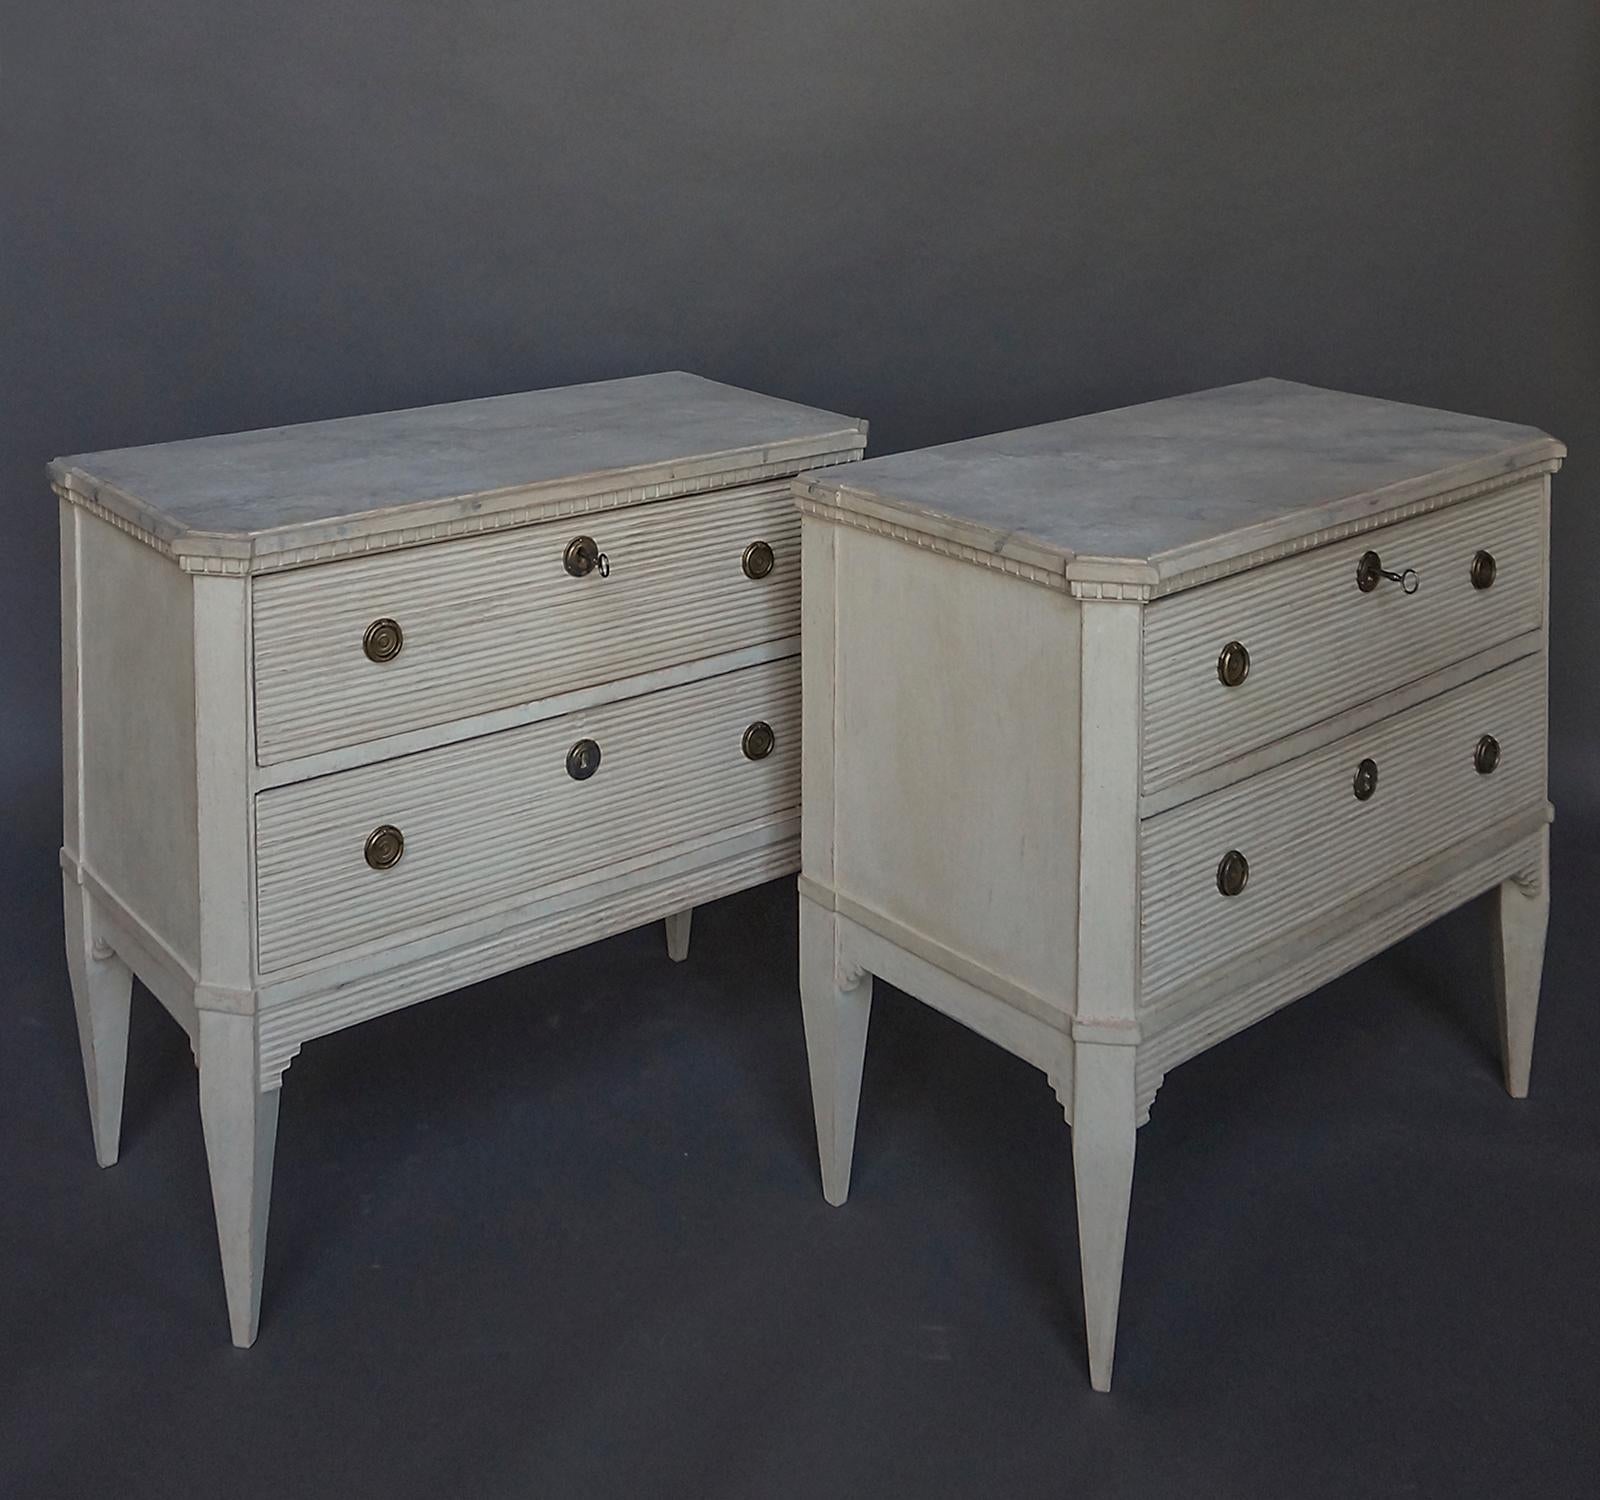 Pair of Swedish Commodes in the Gustavian Style (Gustavianisch)